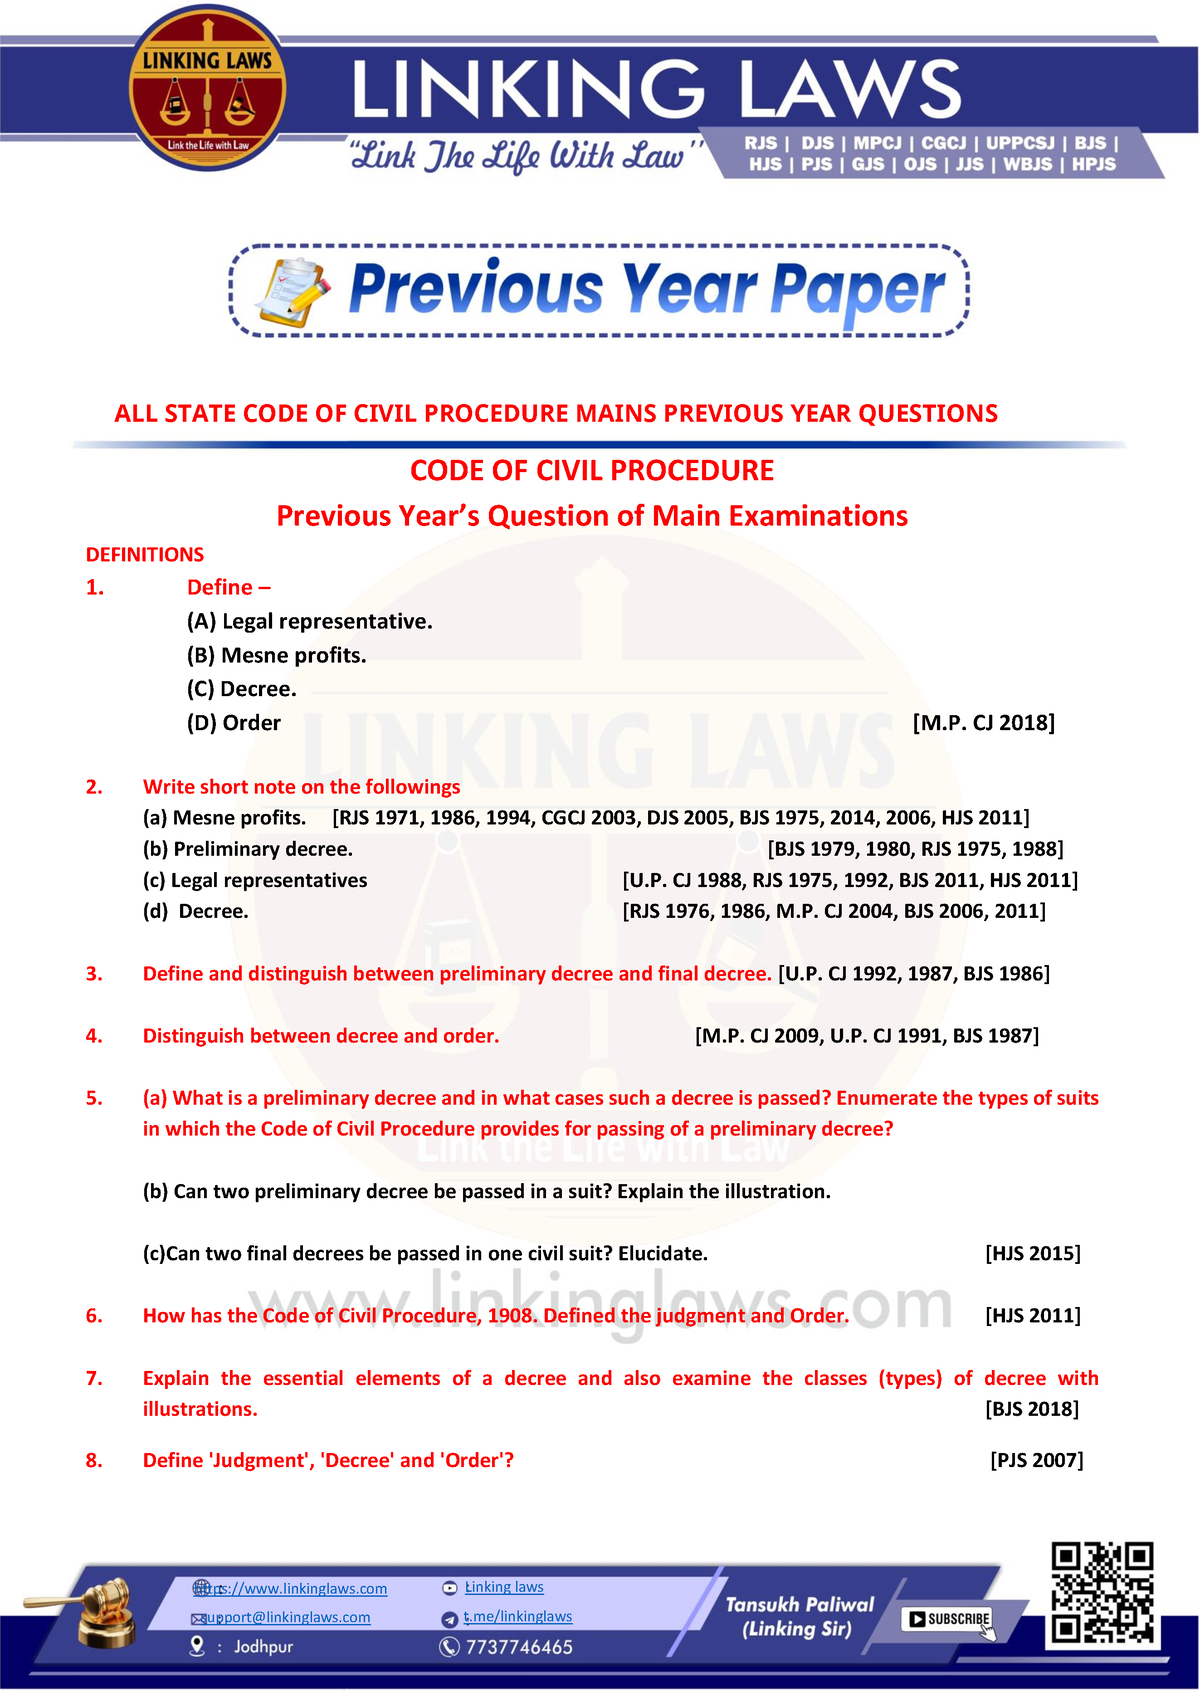 All India Cpc Complete Cpc Linkinglaws Linking Laws All State Code Of Civil Procedure Mains 0824